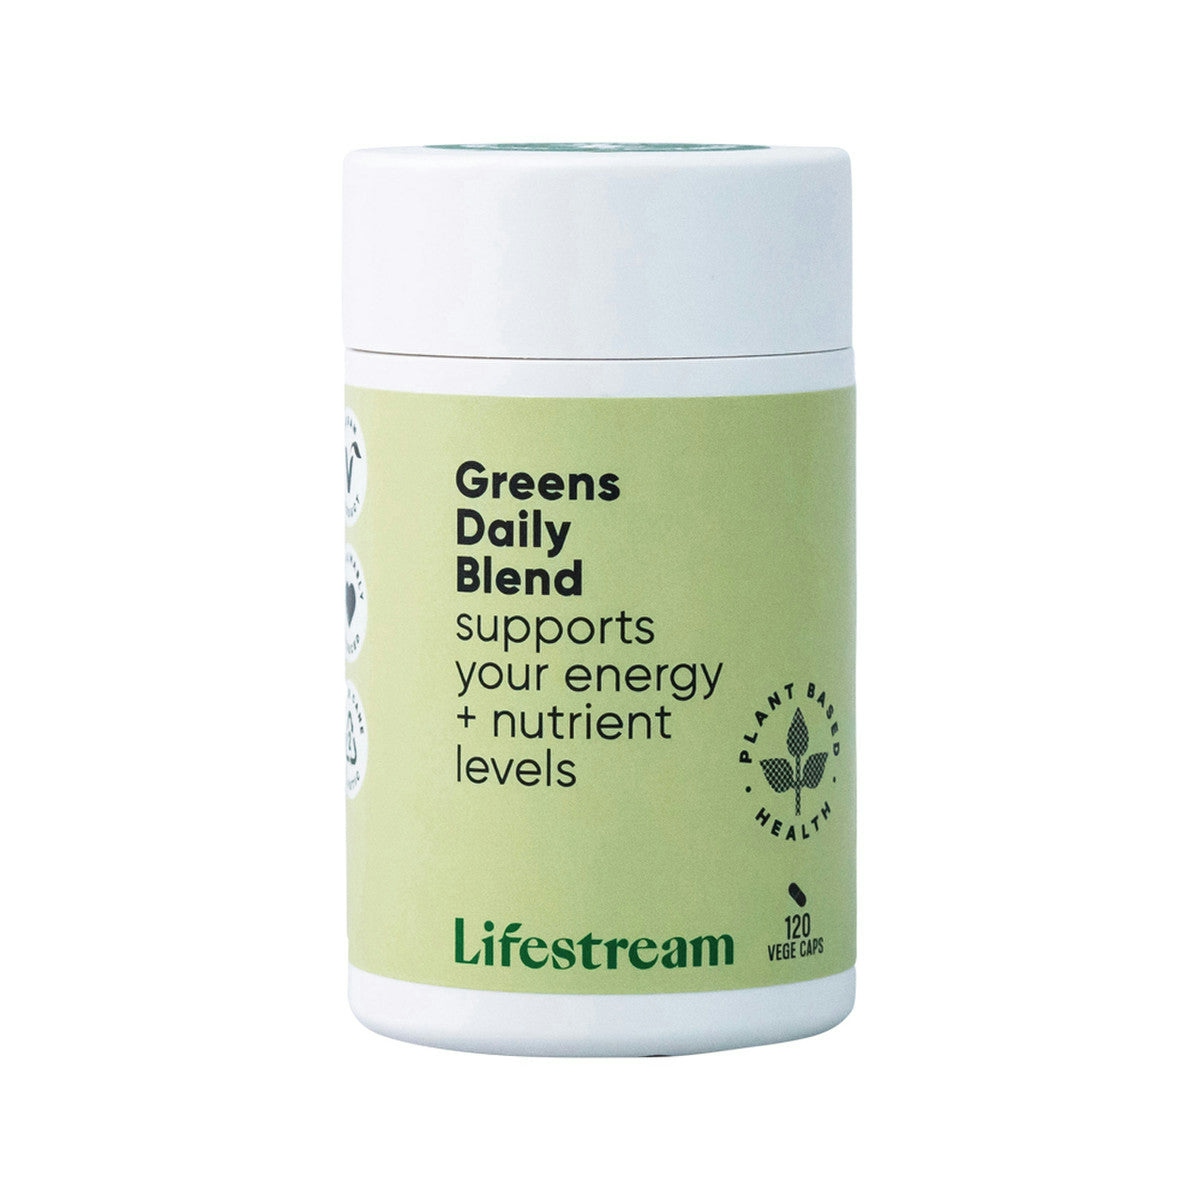 image of Lifestream Greens Daily Blend 120vc on white background